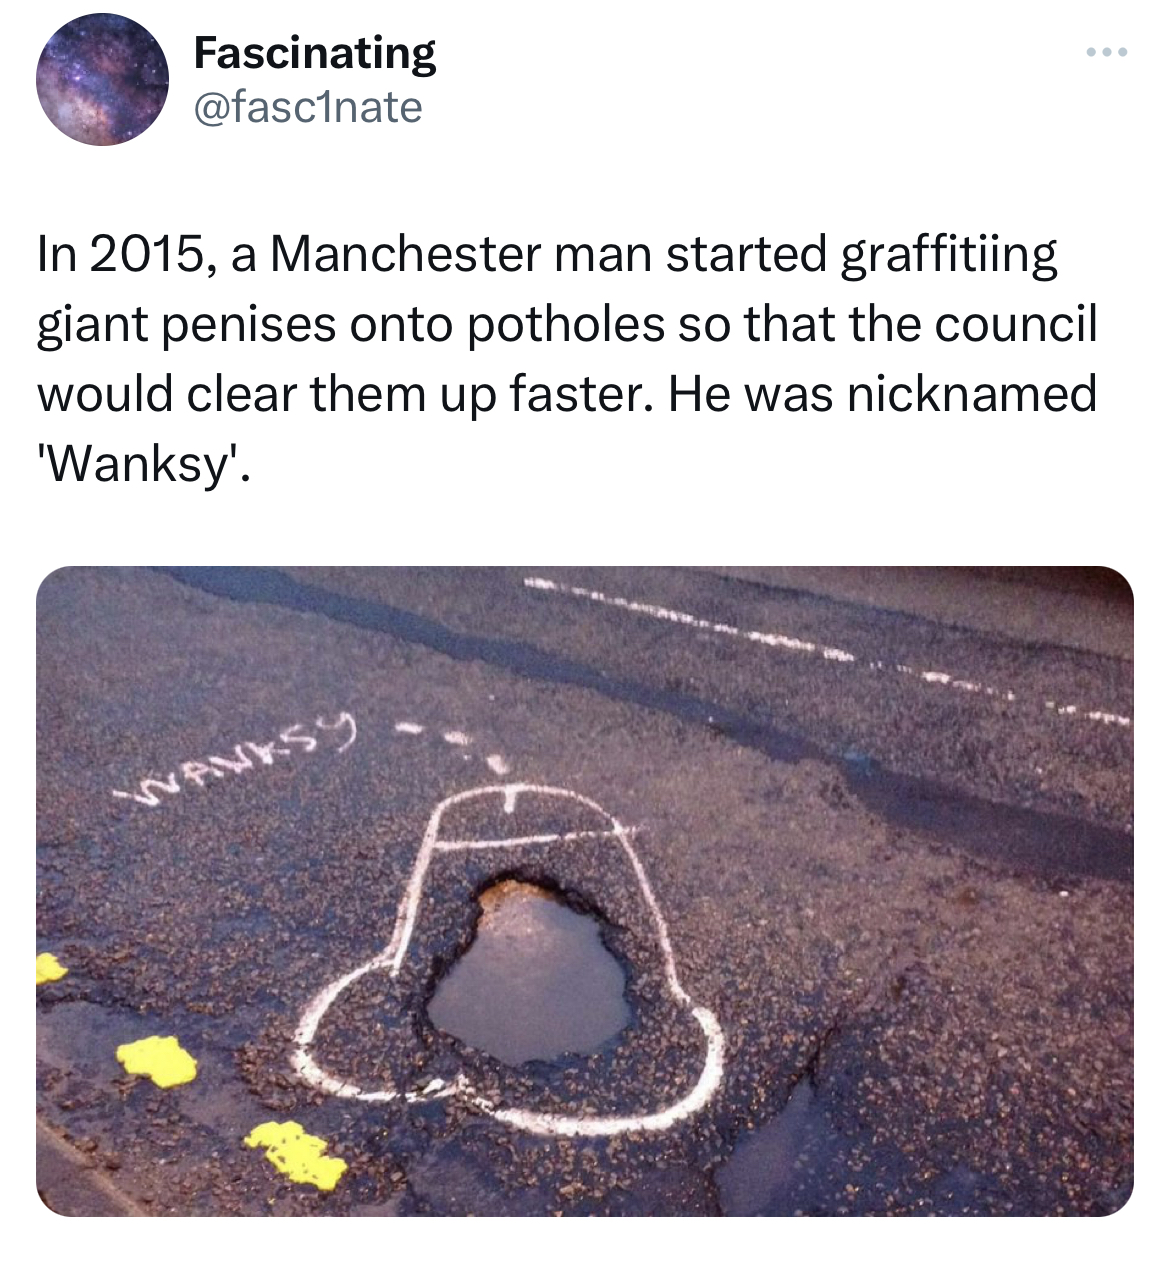 savage tweets - penis potholes - Fascinating In 2015, a Manchester man started graffitiing giant penises onto potholes so that the council would clear them up faster. He was nicknamed 'Wanksy'. Wanksy